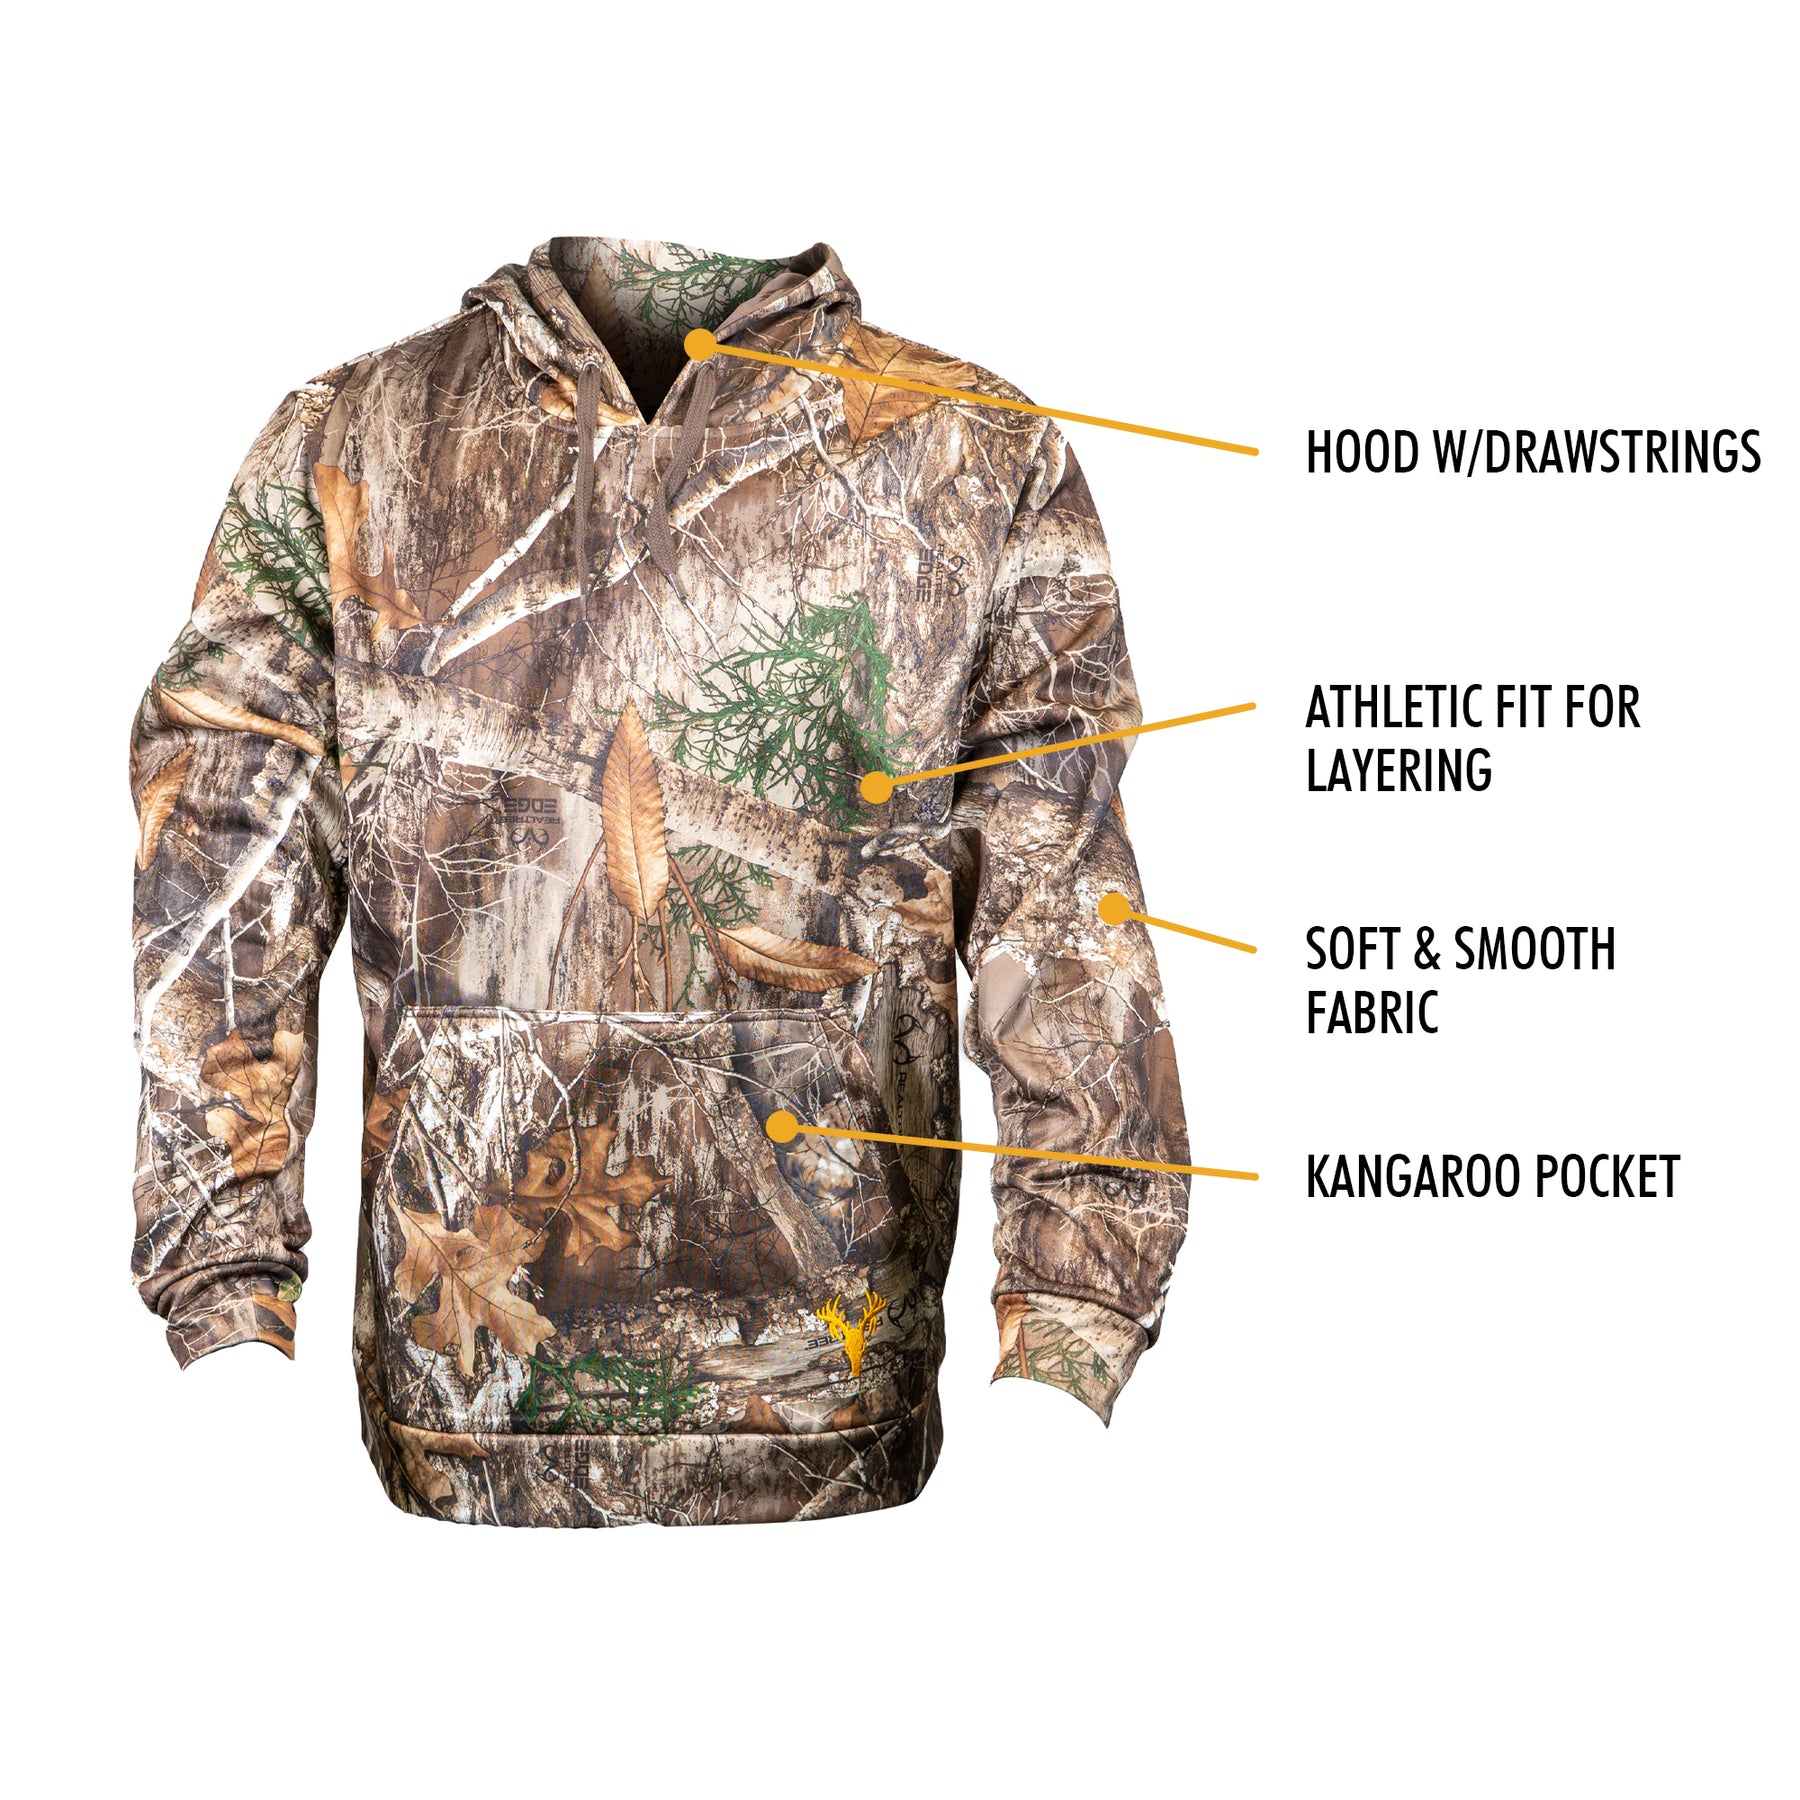 Browning Wasatch CB Long Sleeve T-Shirt - Mossy Oak Country DNA Camo